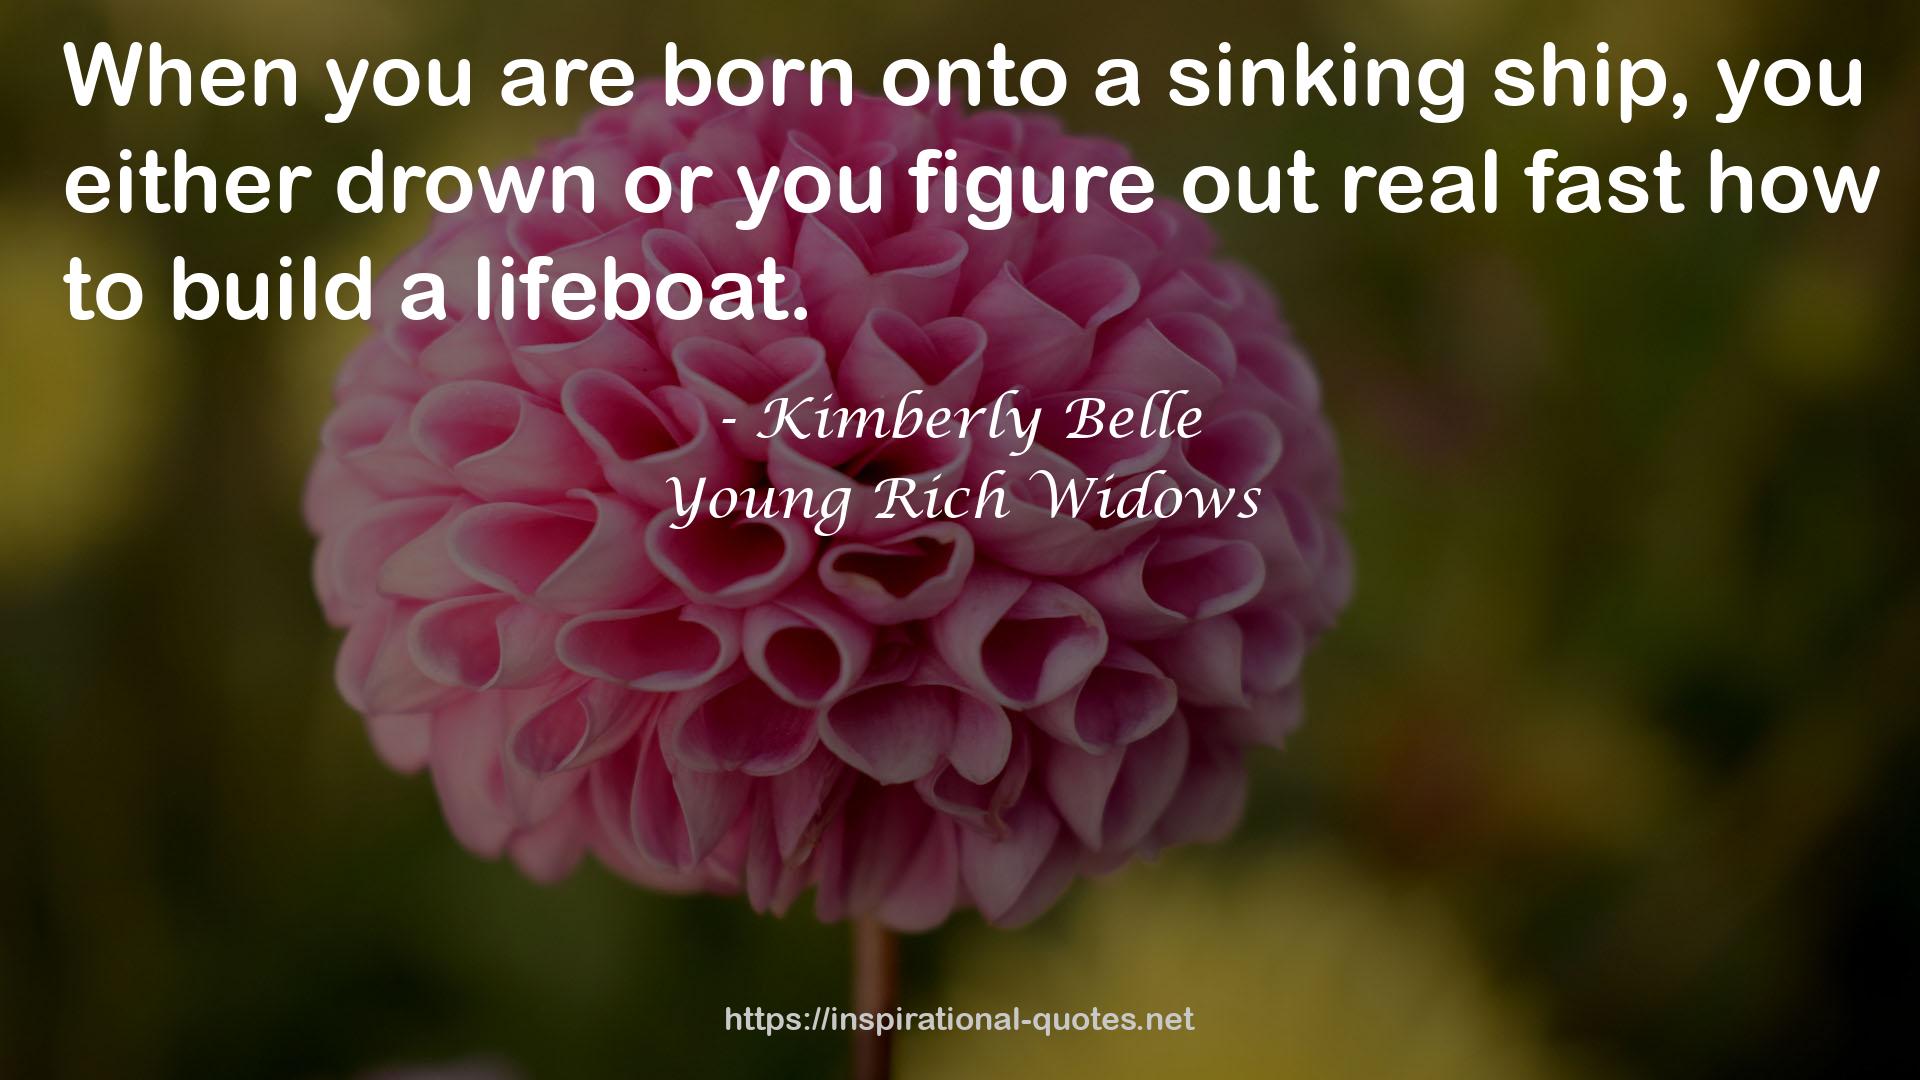 Young Rich Widows QUOTES